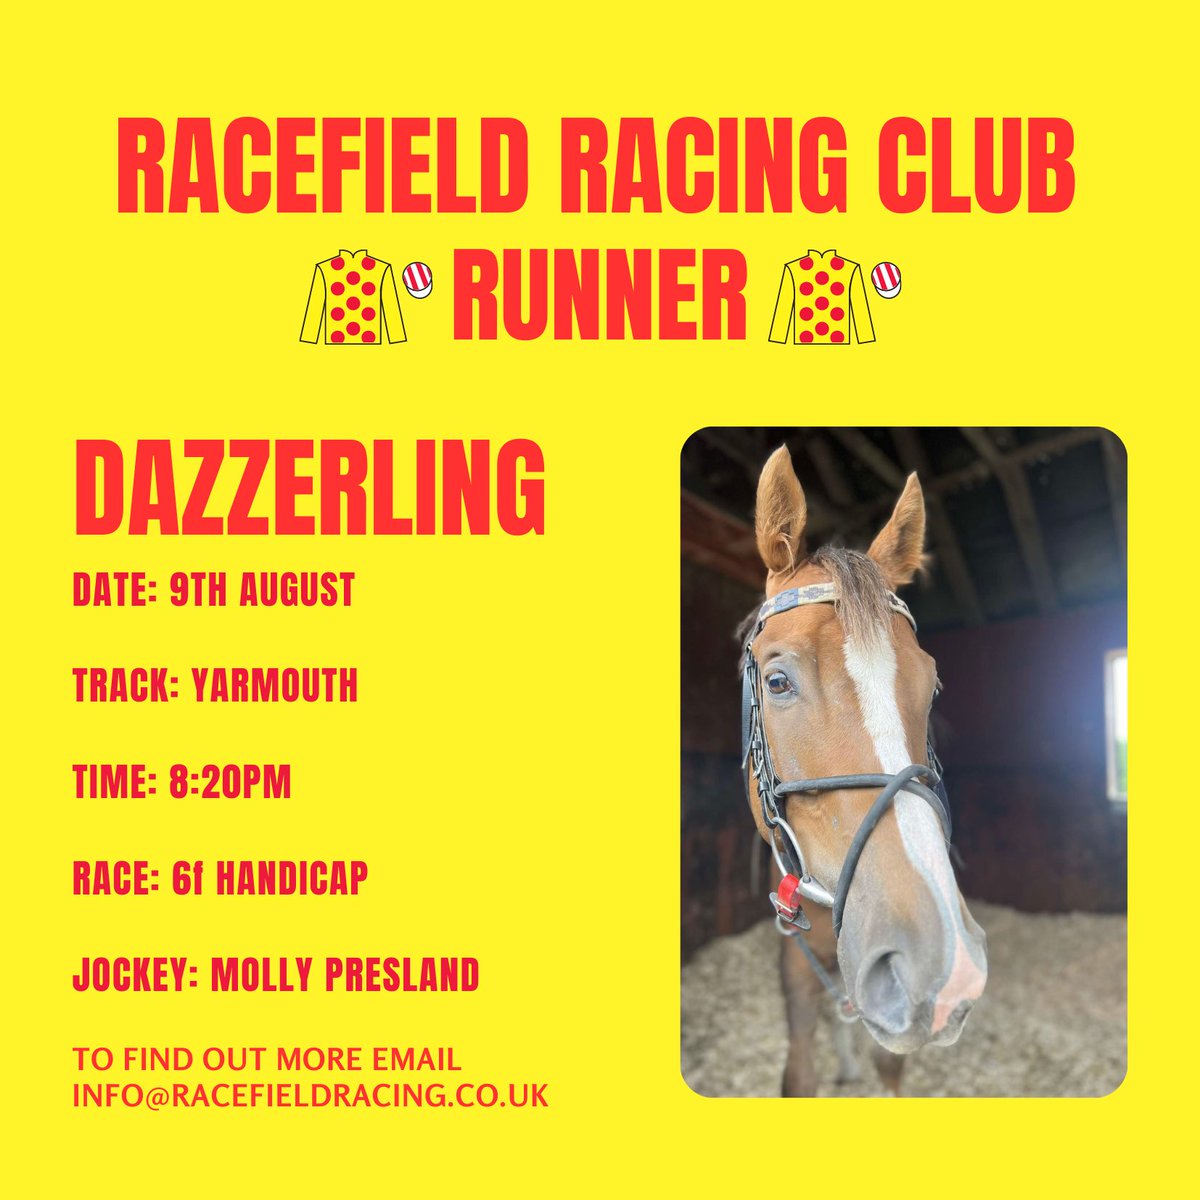 We have our first runners tomorrow as PLEDGE OF PEACE and DAZZERLING head to Great Yarmouth 🏇 Join in with the fun by becoming a Club member, giving you access to a range of perks including stable visits, race day tickets and more! Email info@racefieldracing.co.uk